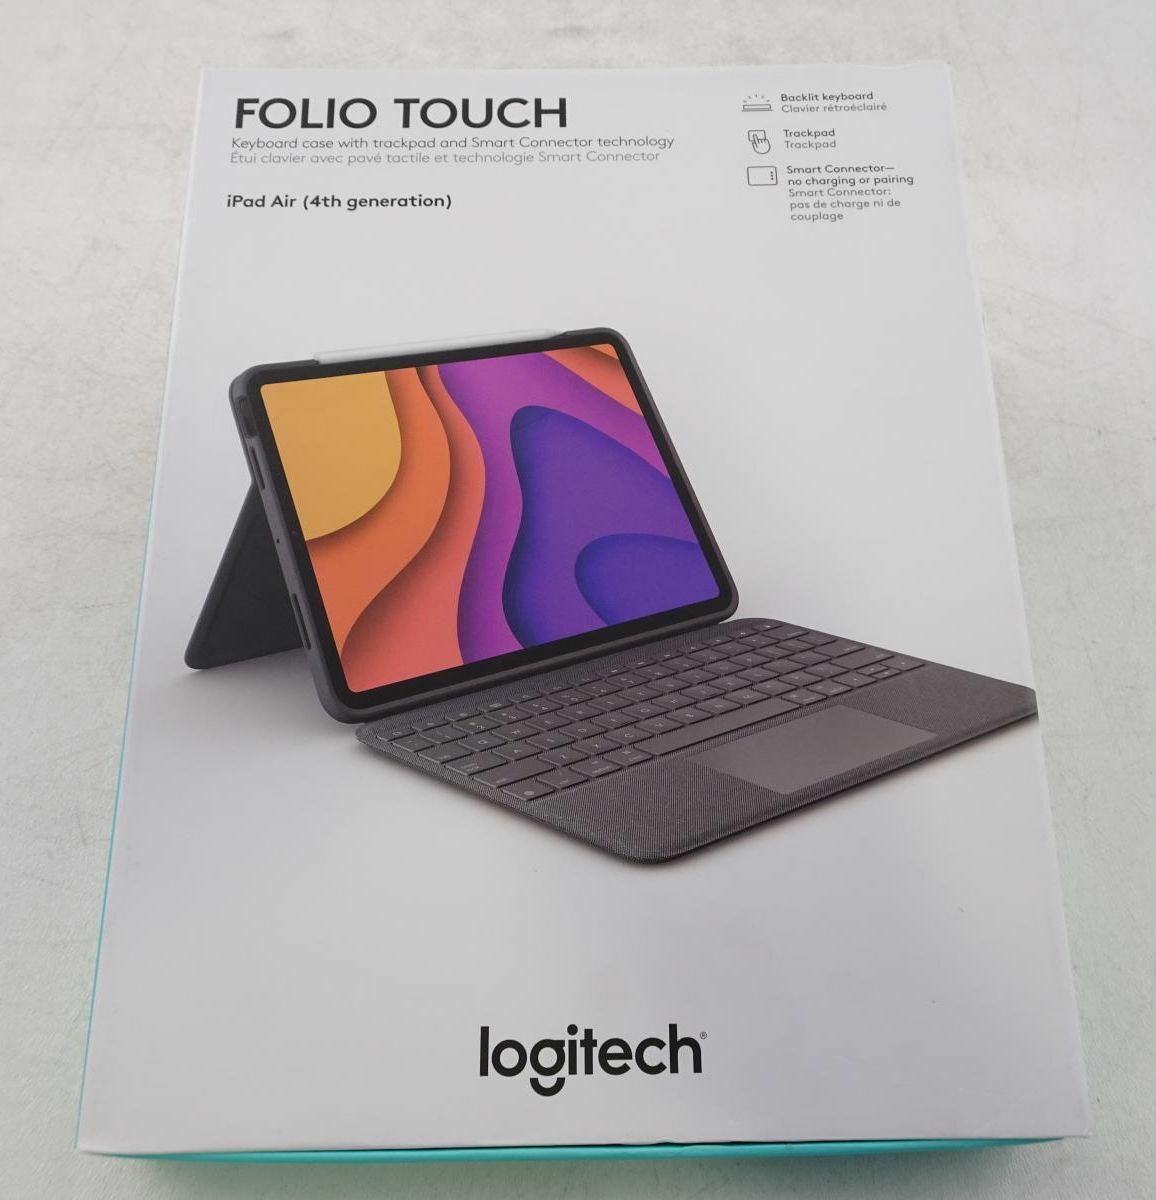 Logitech Folio Touch iPad Keyboard Case with Trackpad for iPad Air - Oxford Grey